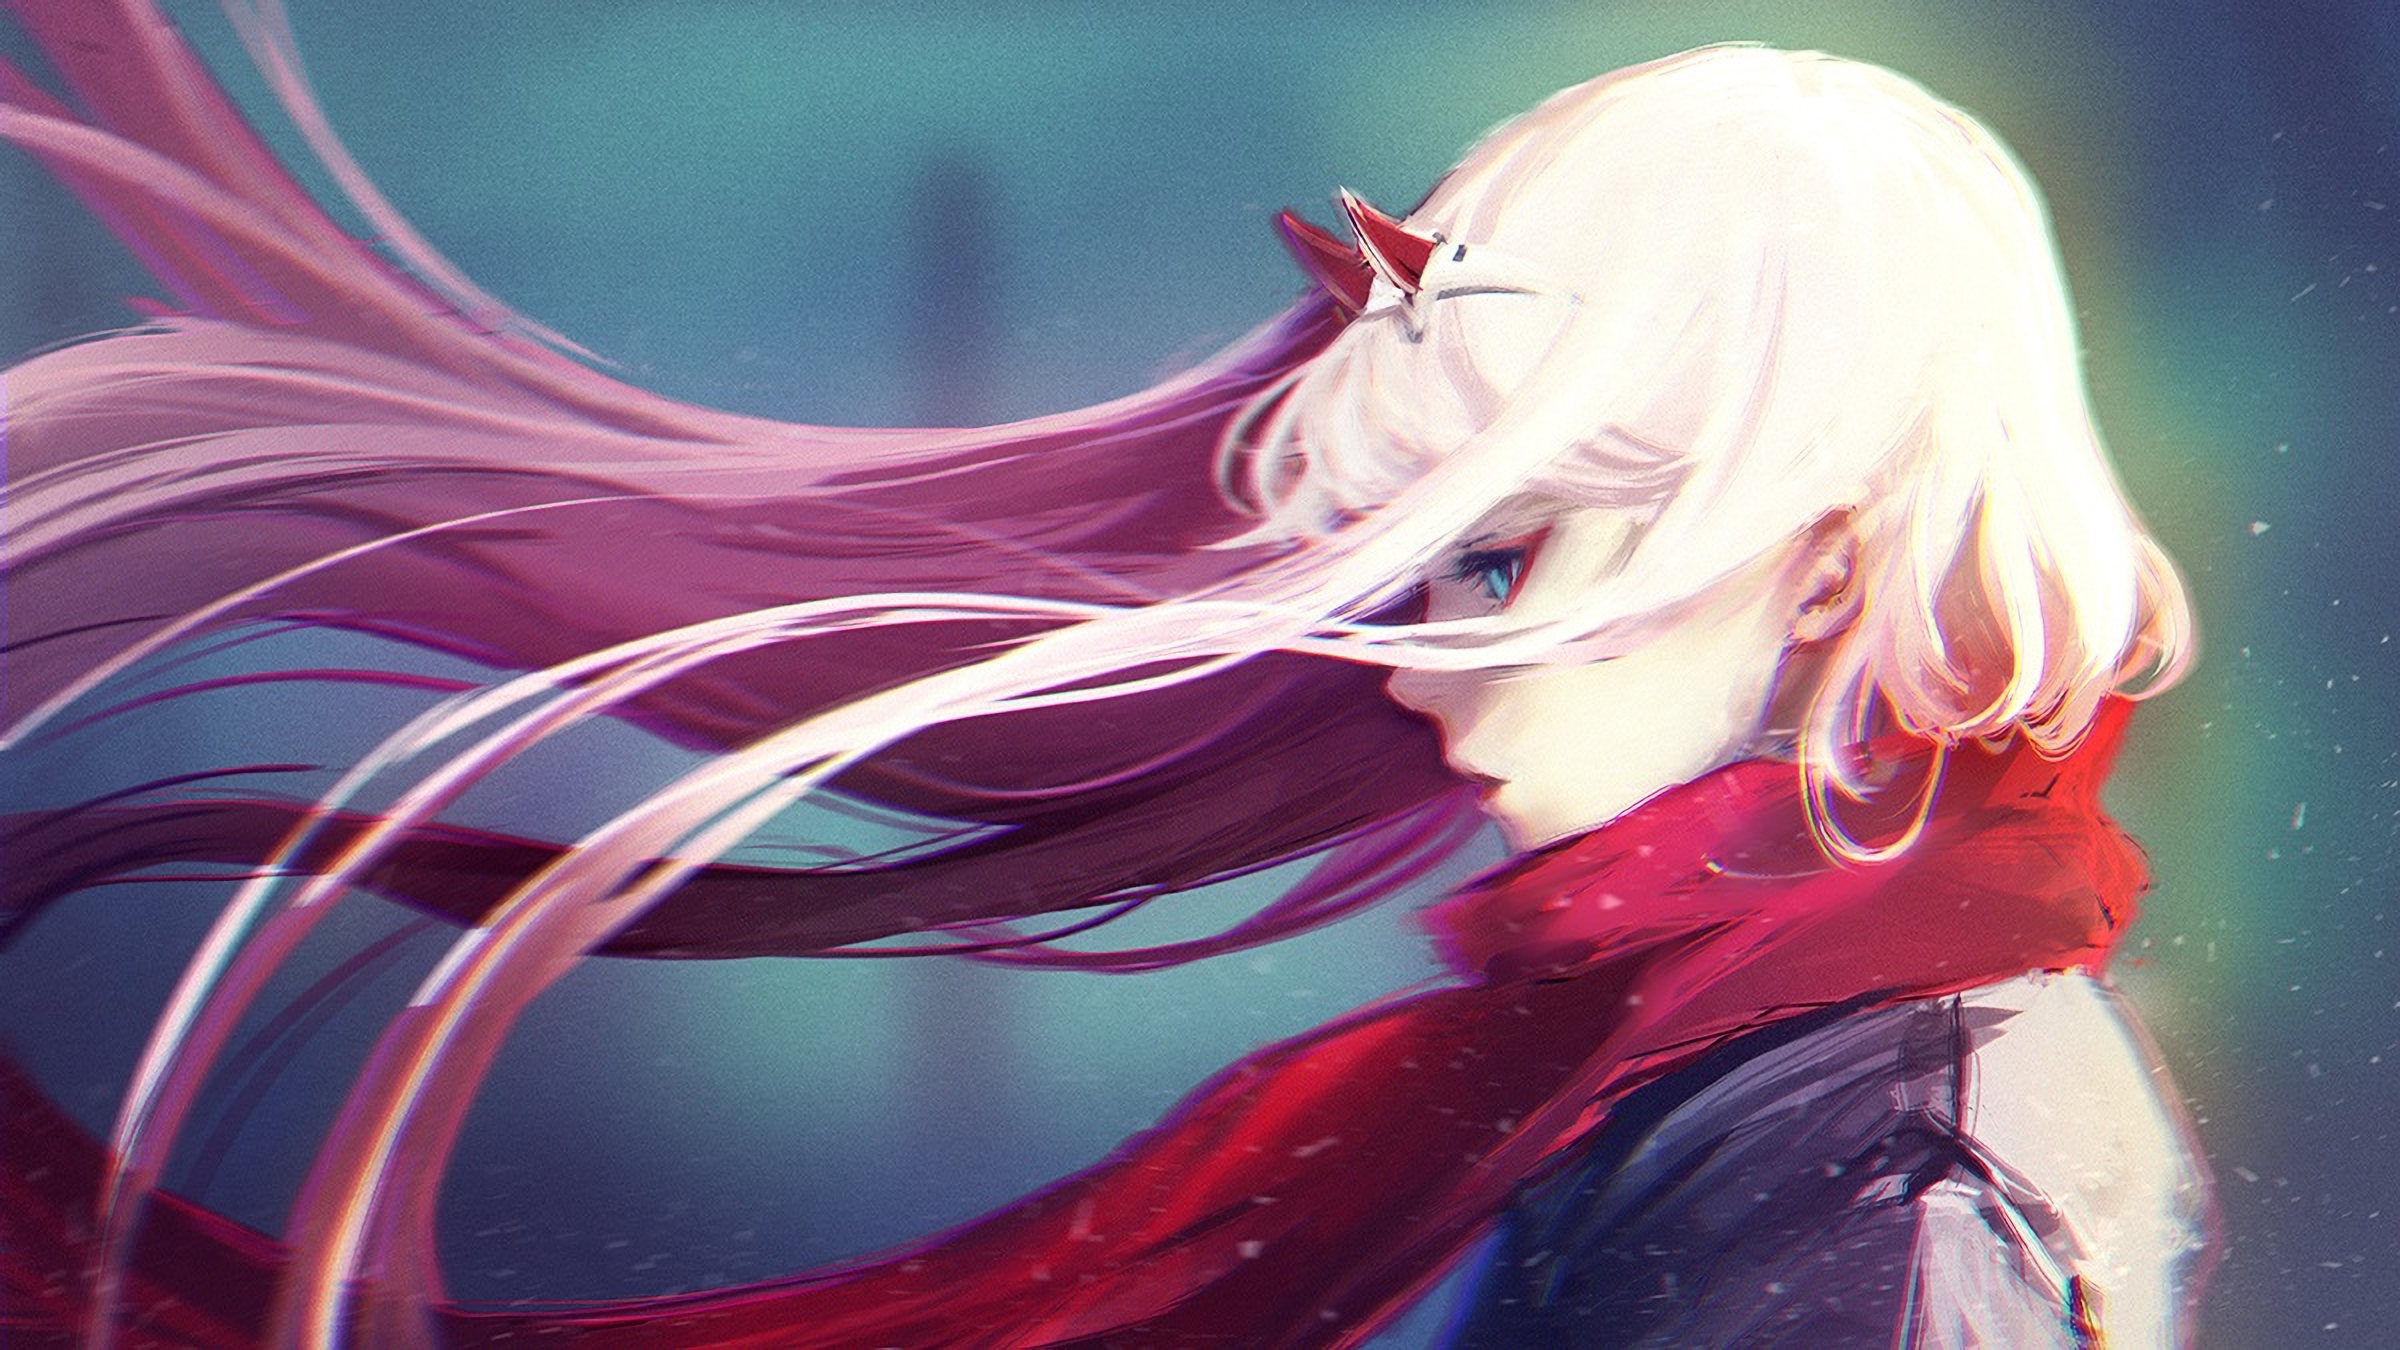 Anime 2400x1350 Yuumei Darling in the FranXX Zero Two (Darling in the FranXX) anime girls pink hair horns long hair 2D hair blowing in the wind scarf